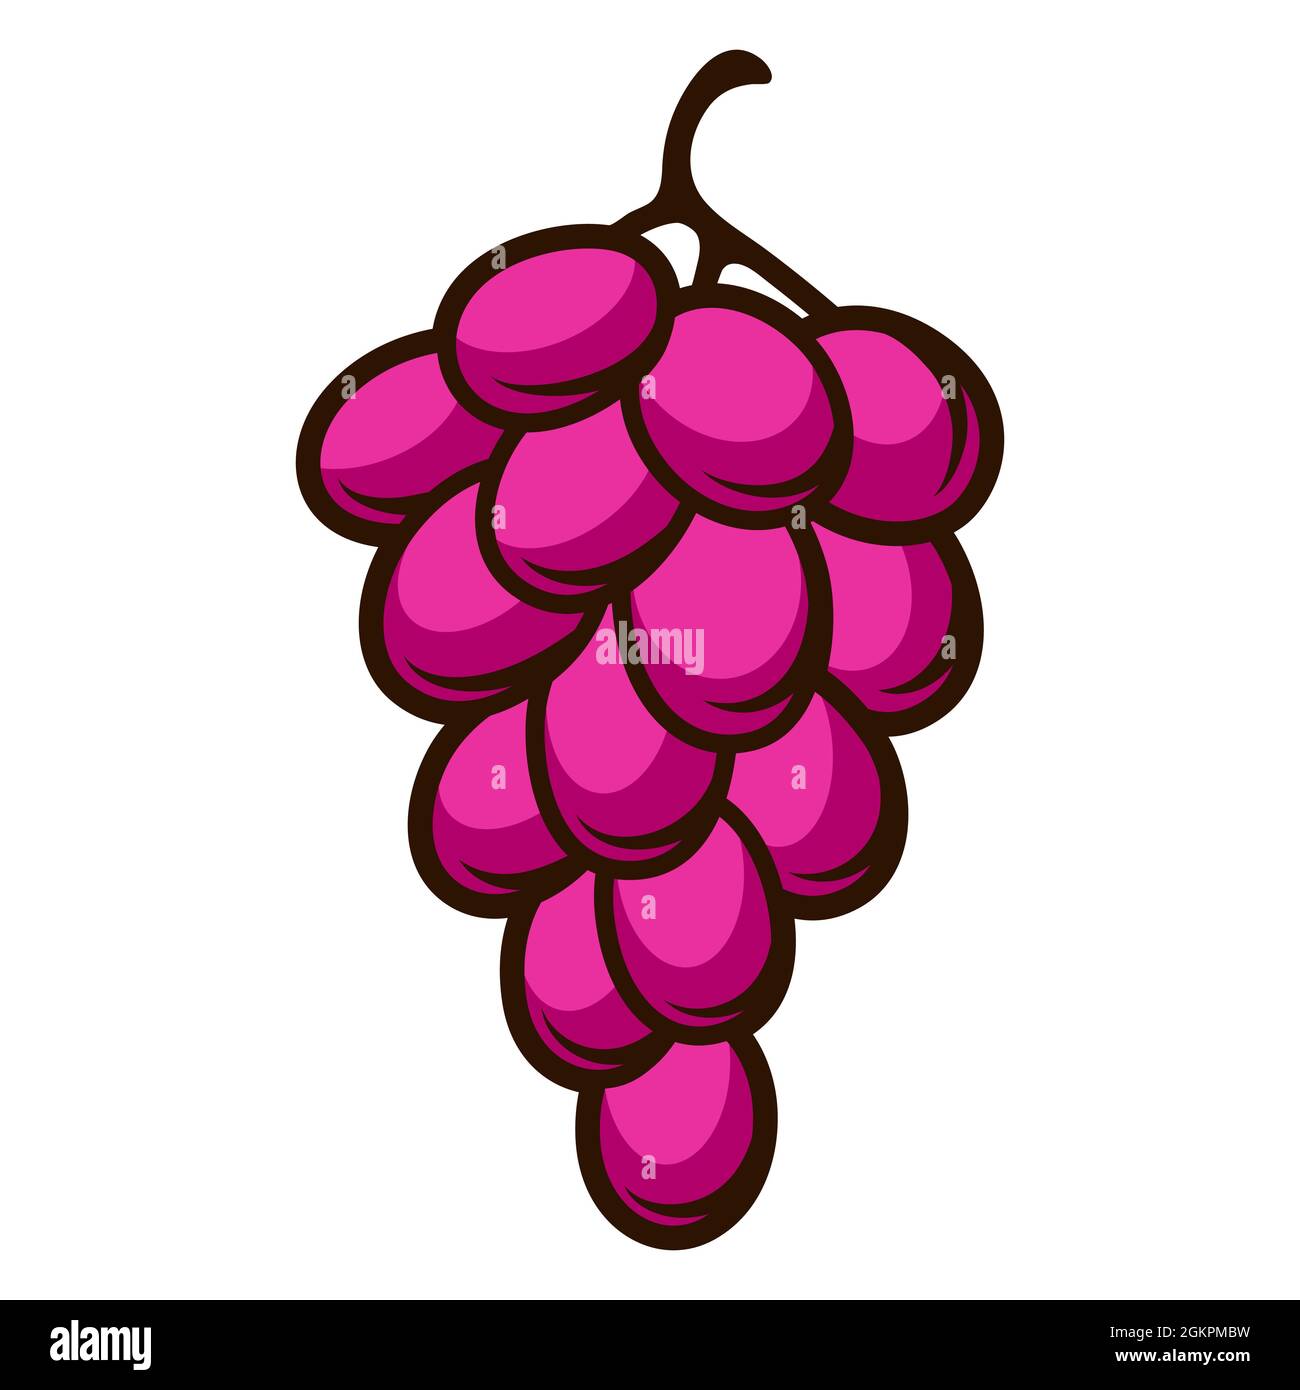 Illustration of fresh ripe grapes. Autumn harvest of fruits. Food item for farms, markets and shops. Stock Vector